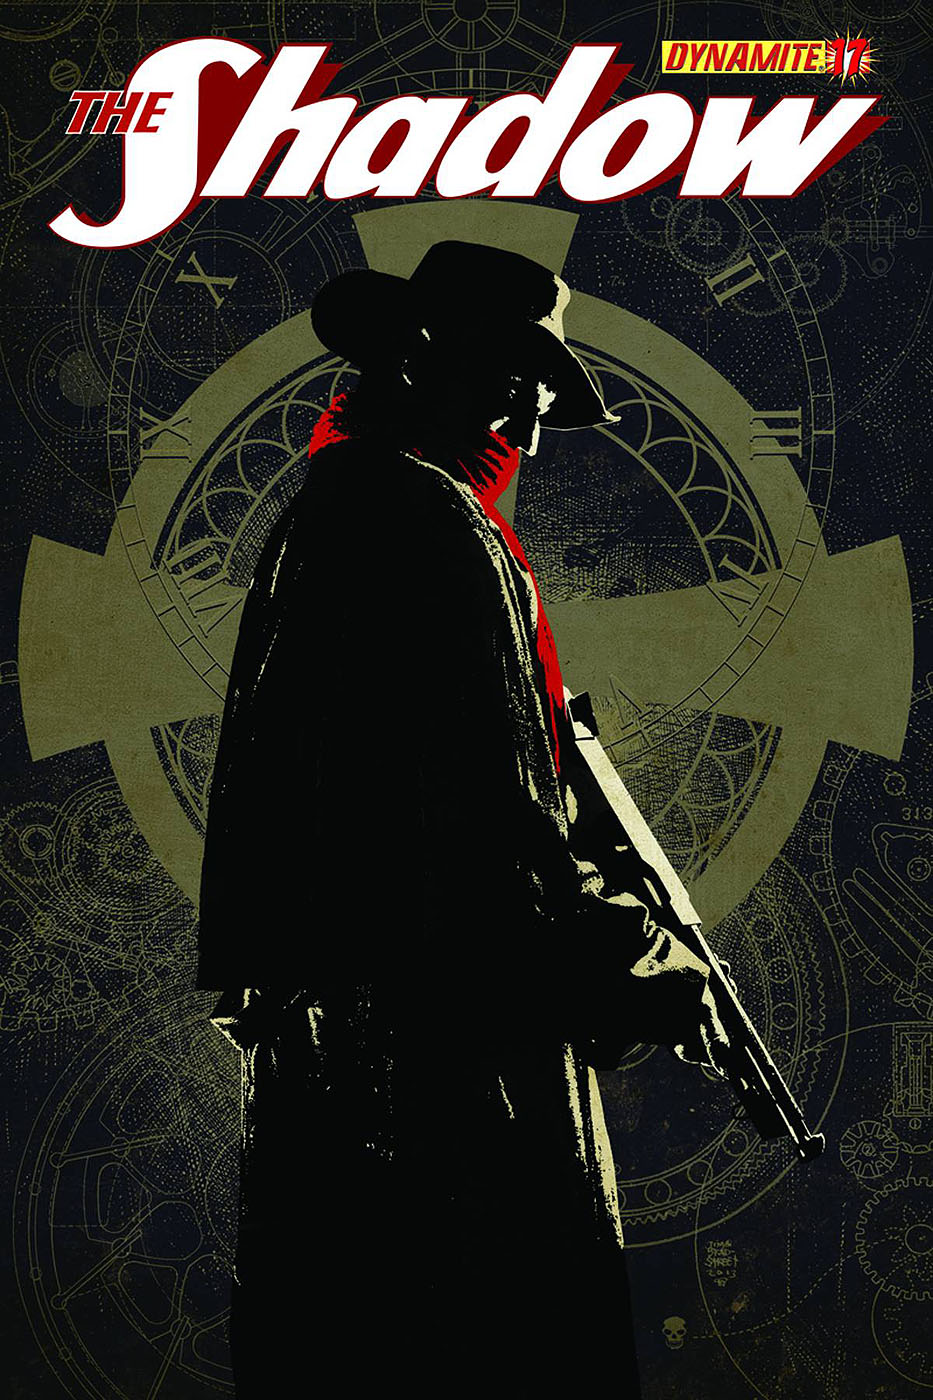 THE SHADOW #17